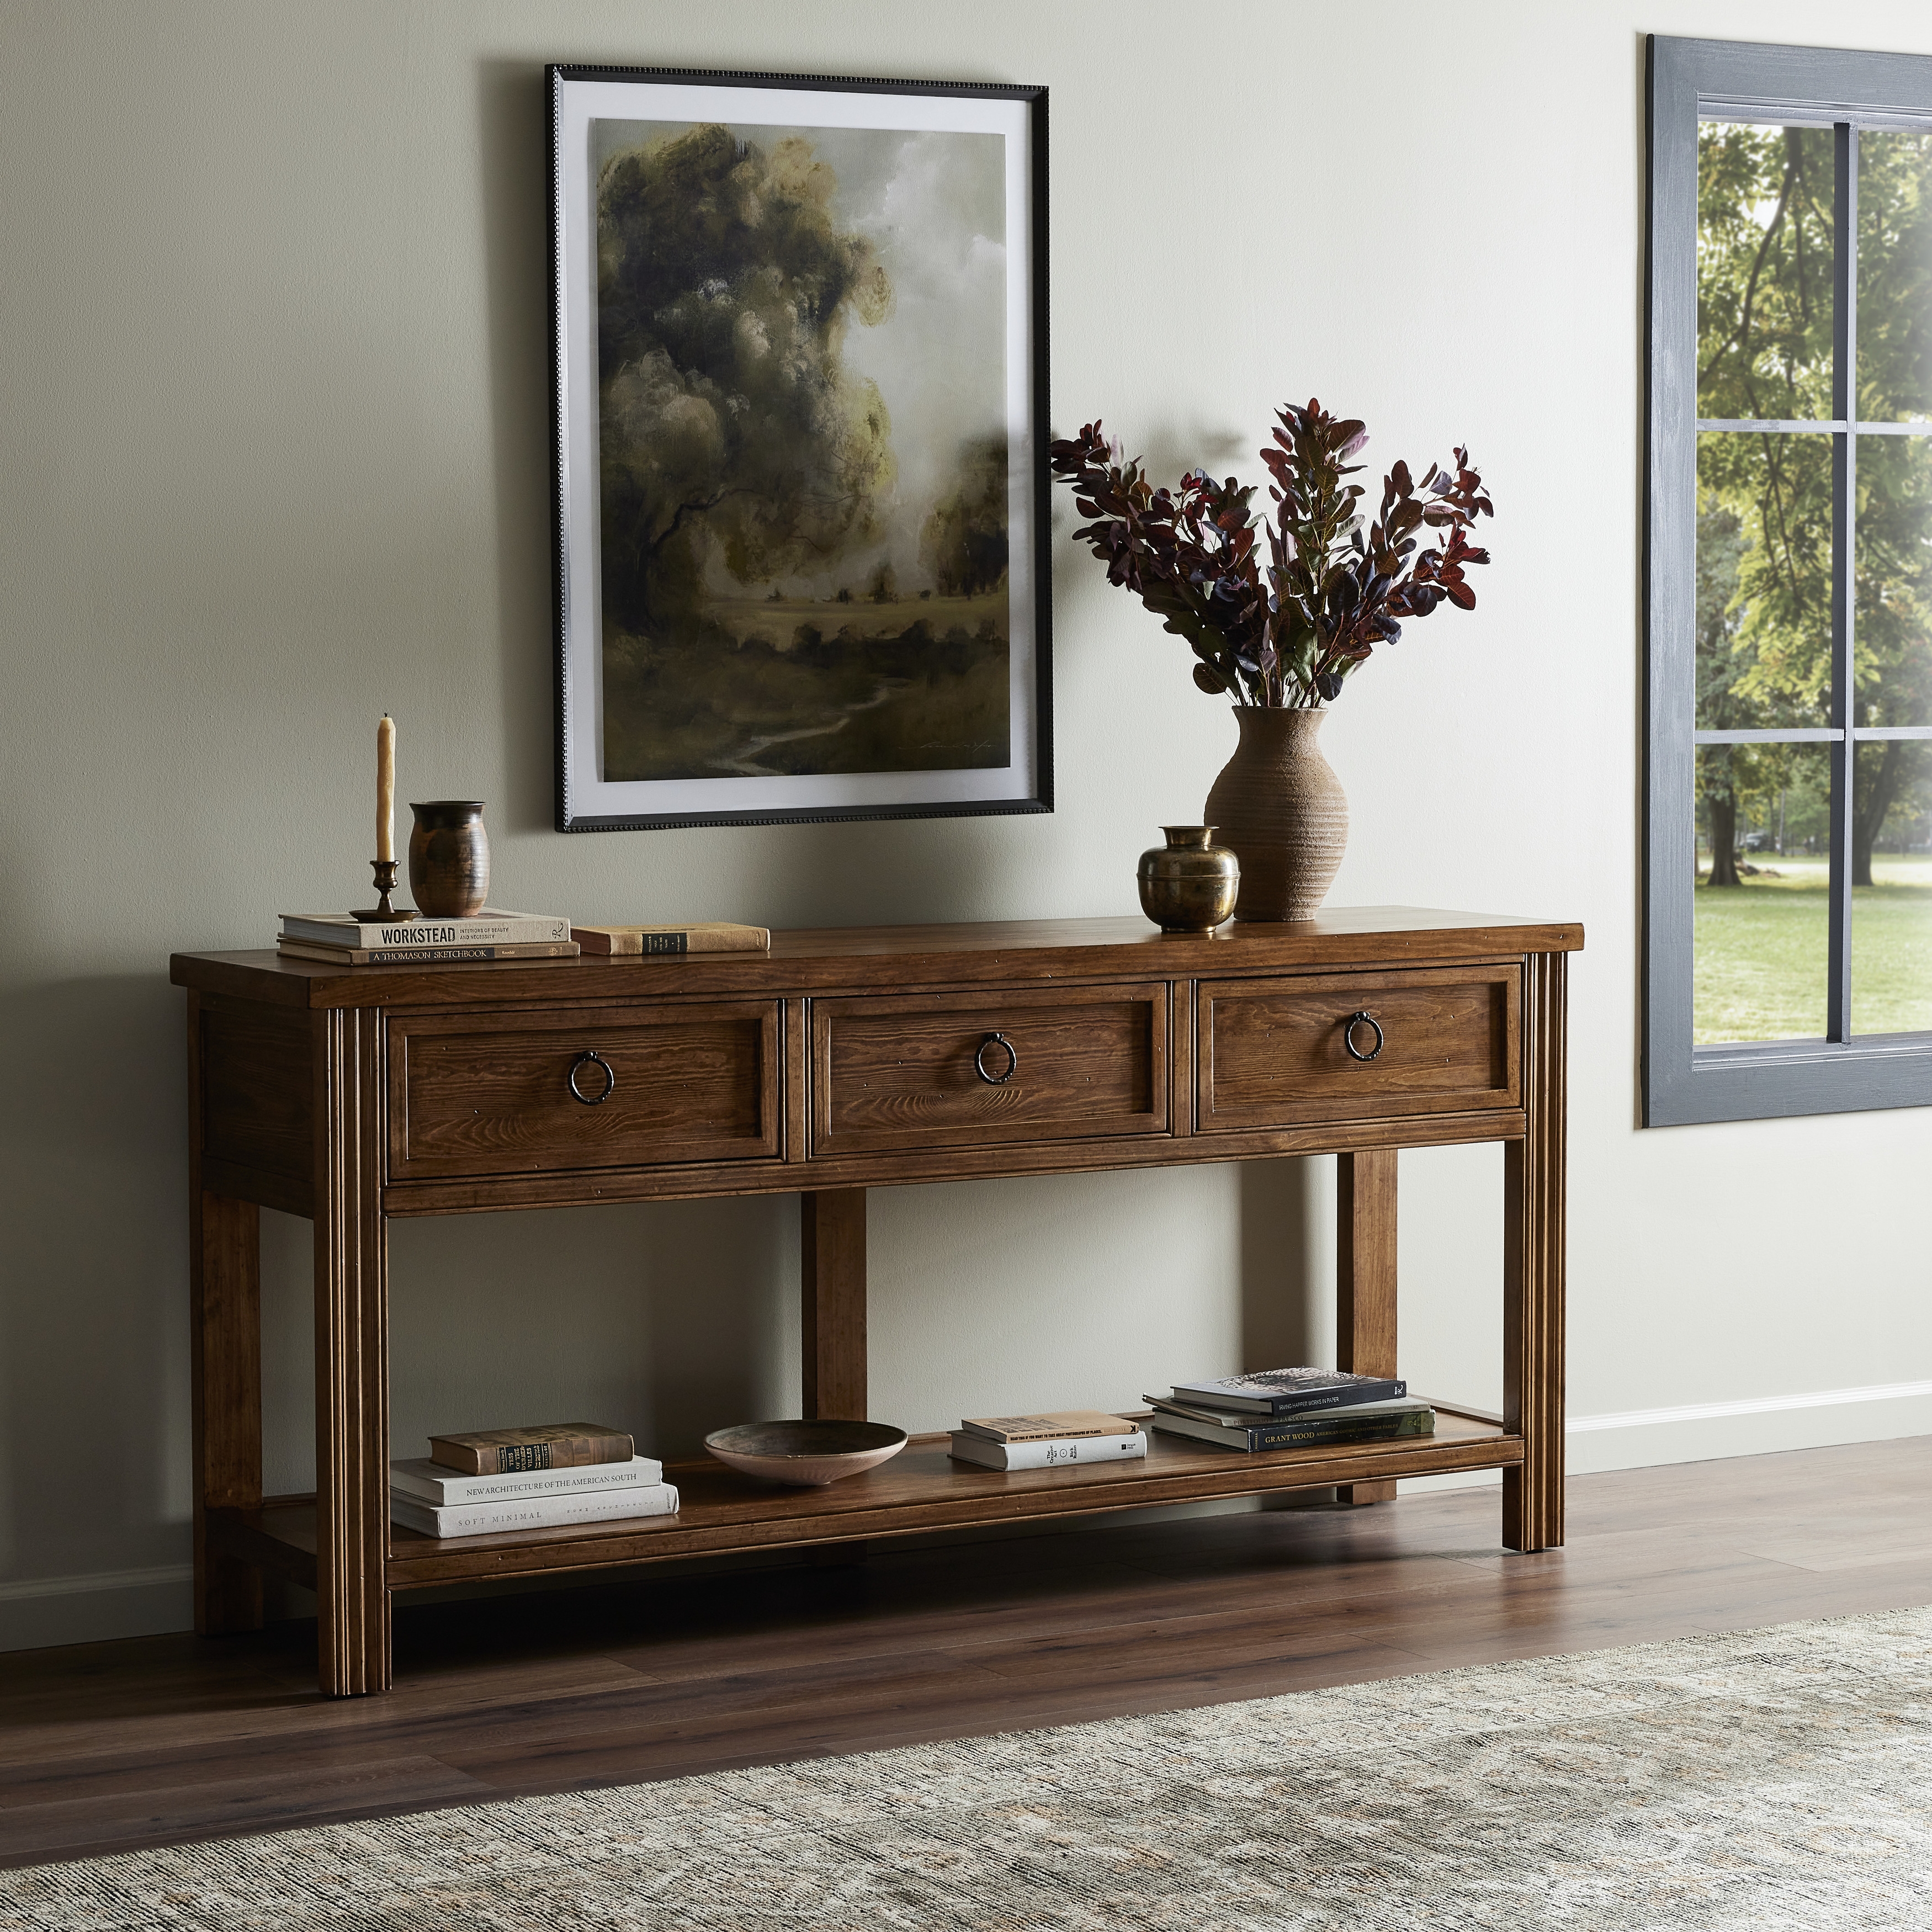 The Lazy Monsieur Partouche Table-Brown - Image 16